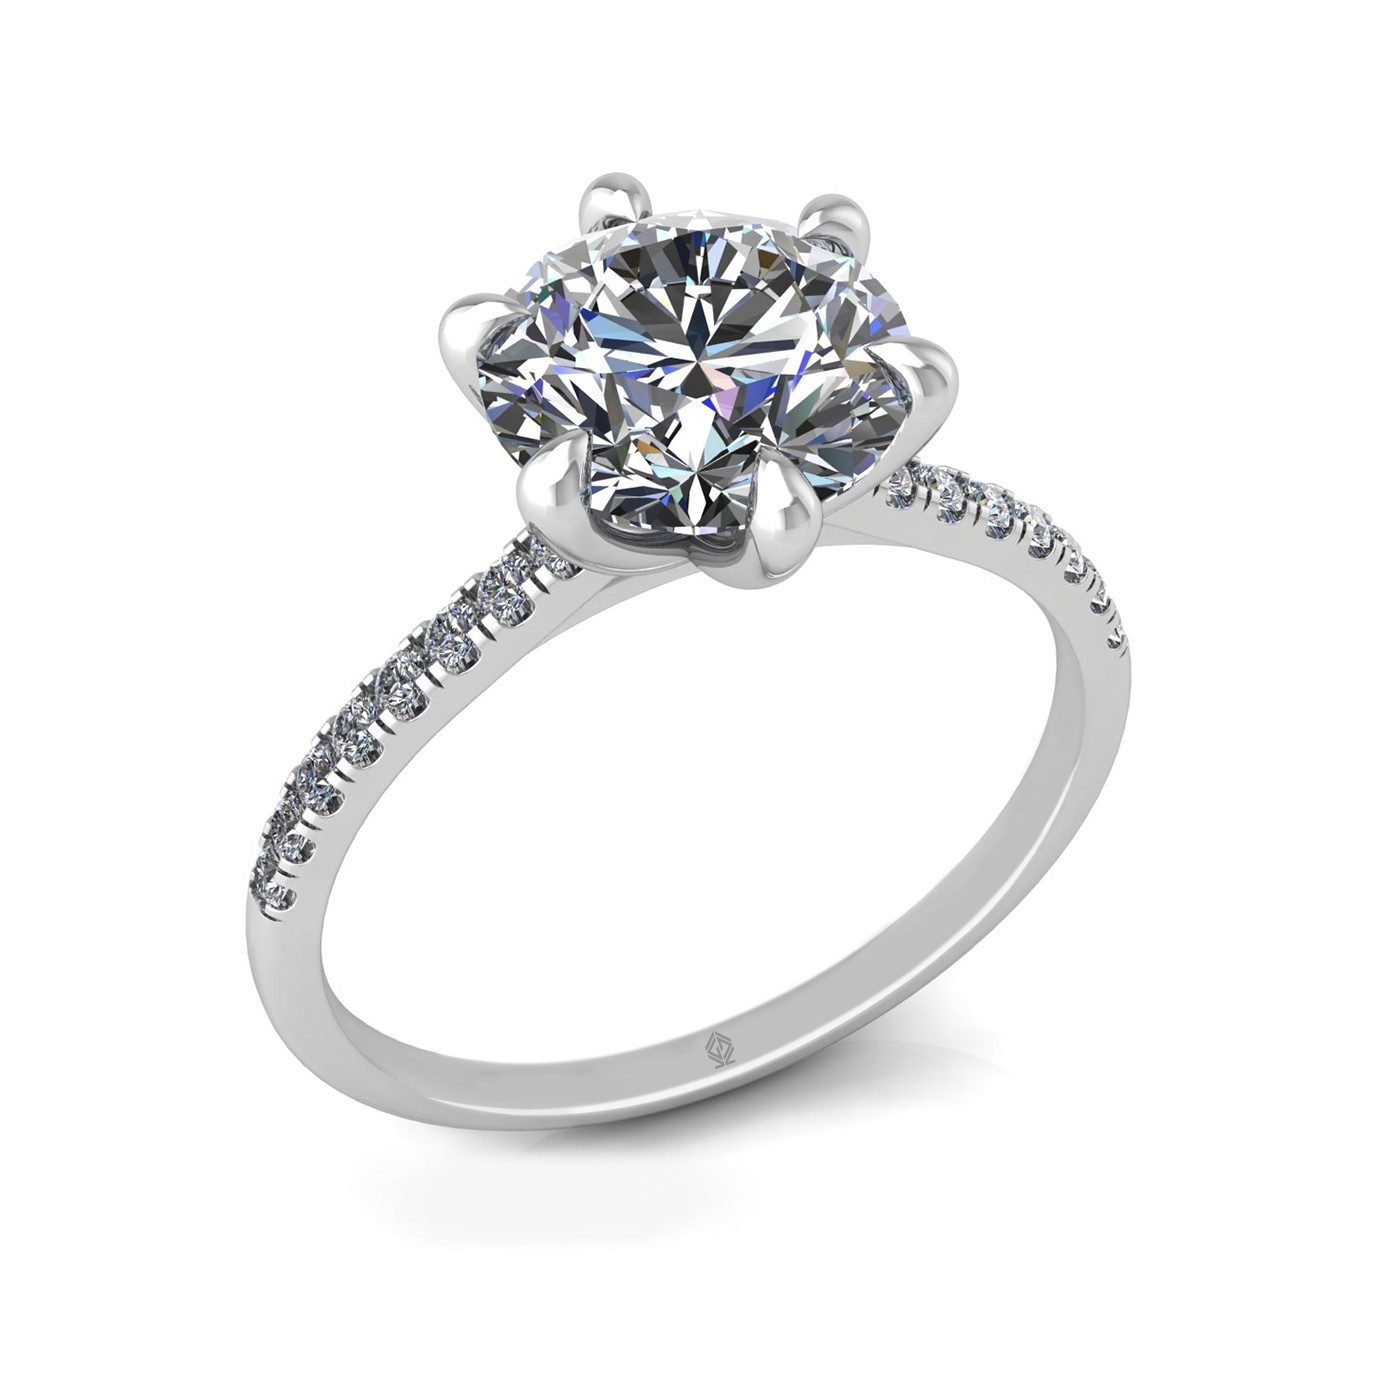 18k white gold 2,00 ct 6 prongs round cut diamond engagement ring with whisper thin pavÉ set band